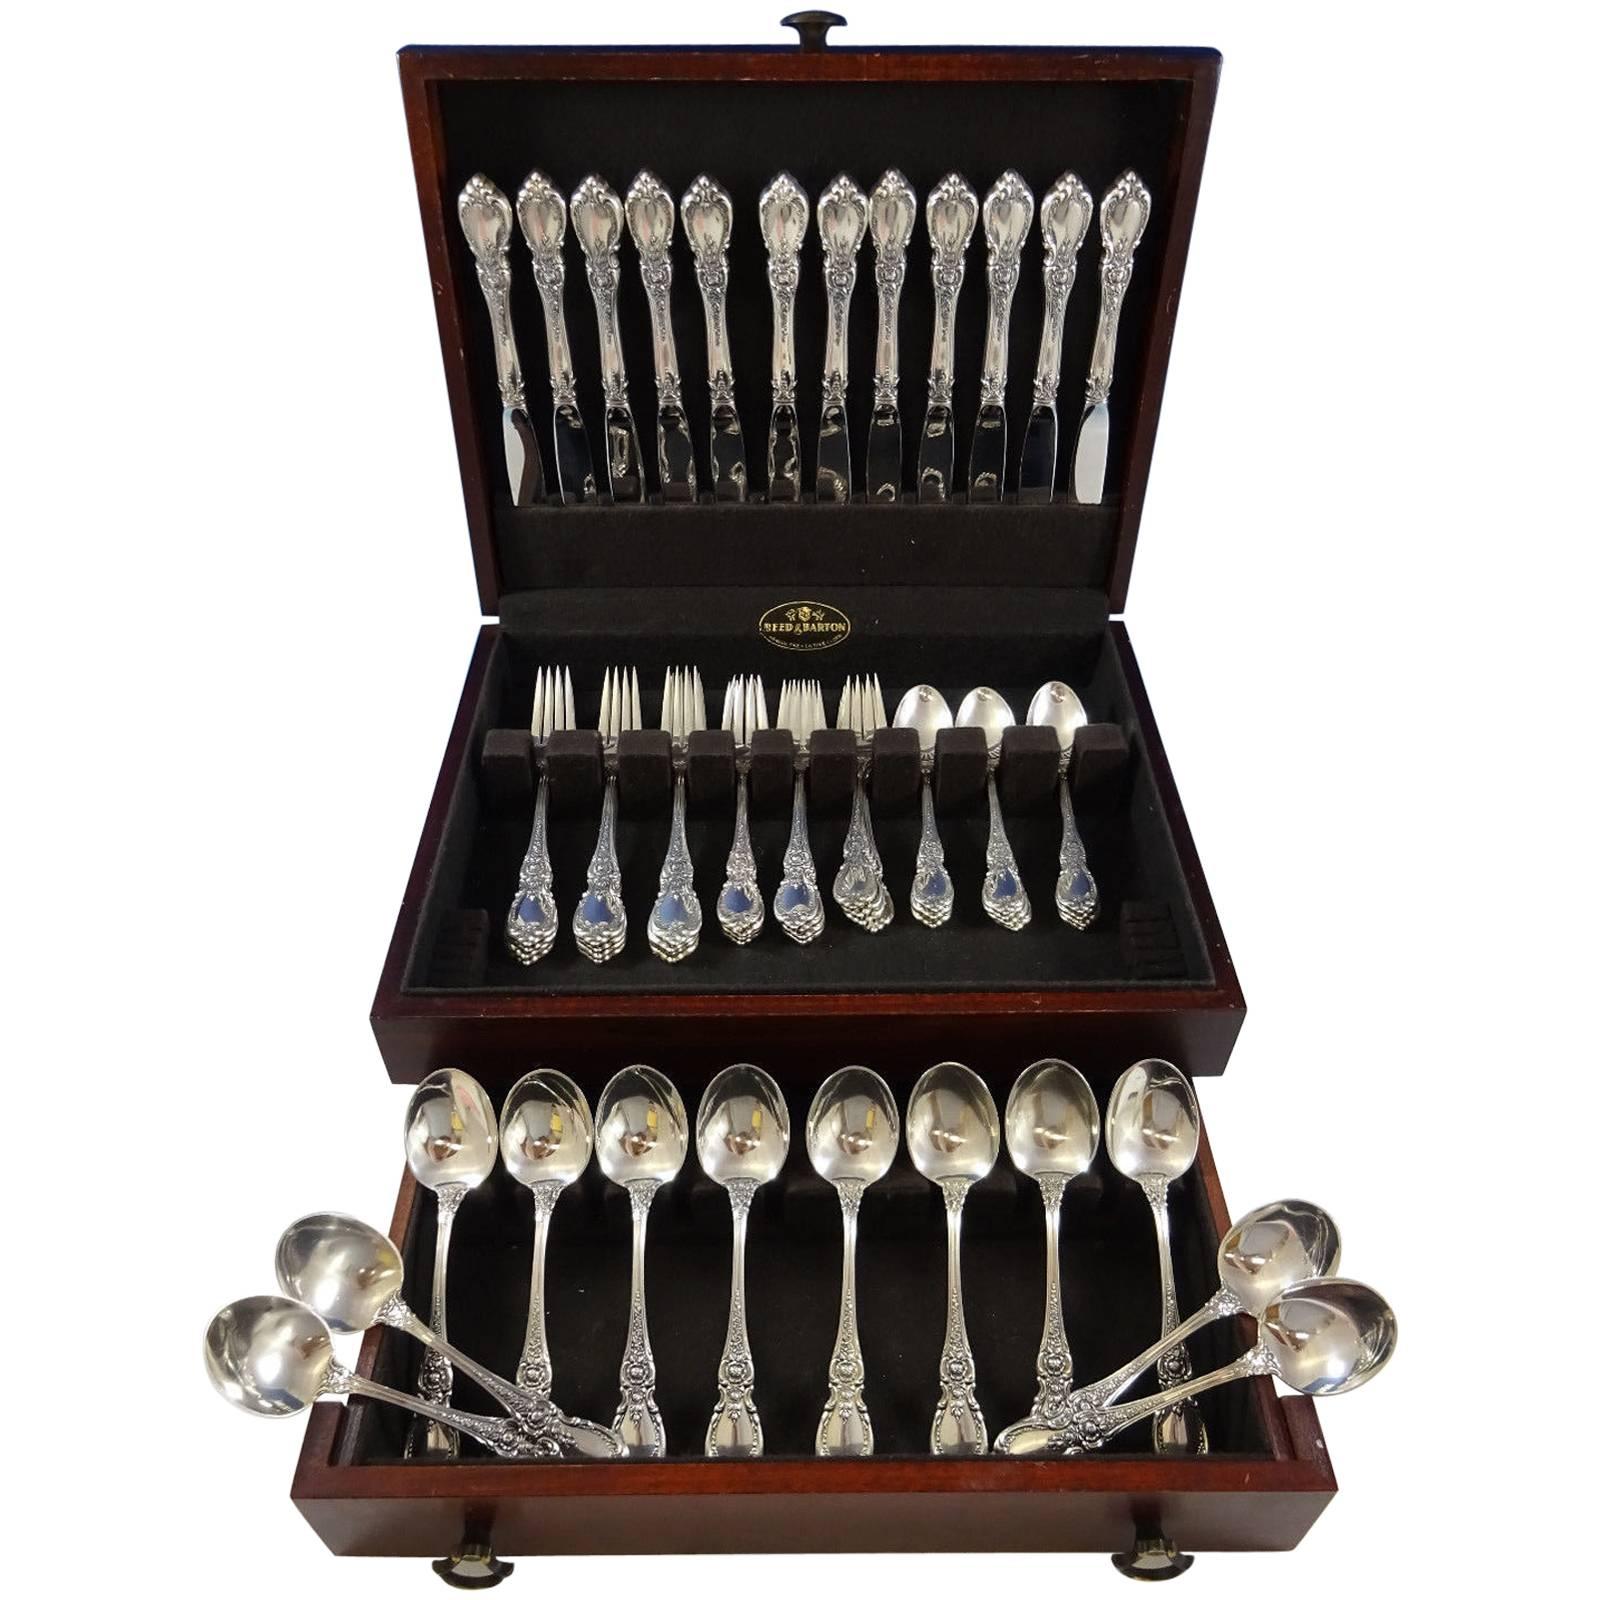 Charlemagne by Towle sterling silver flatware set of 60 pieces. This set includes:

12 knives, 9 1/8